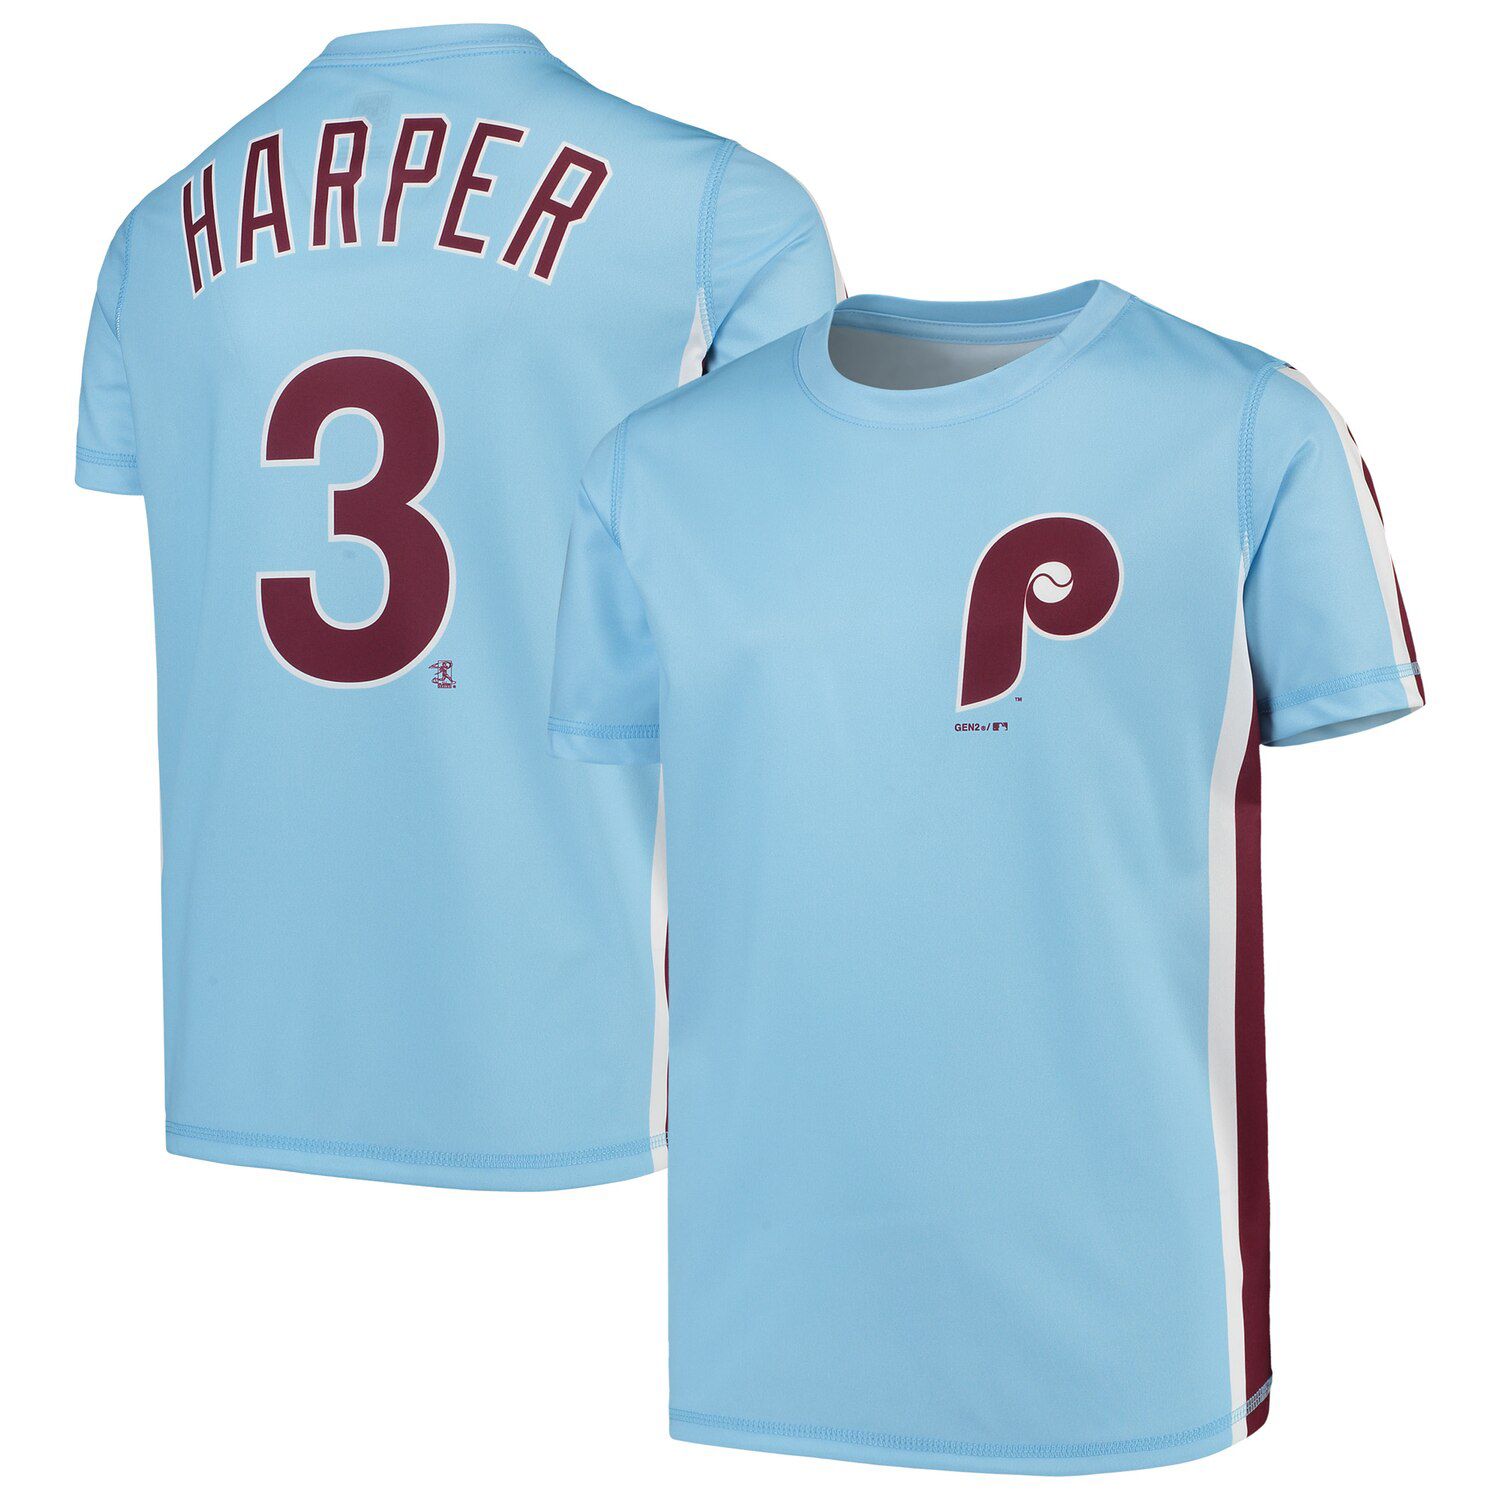 harper youth jersey